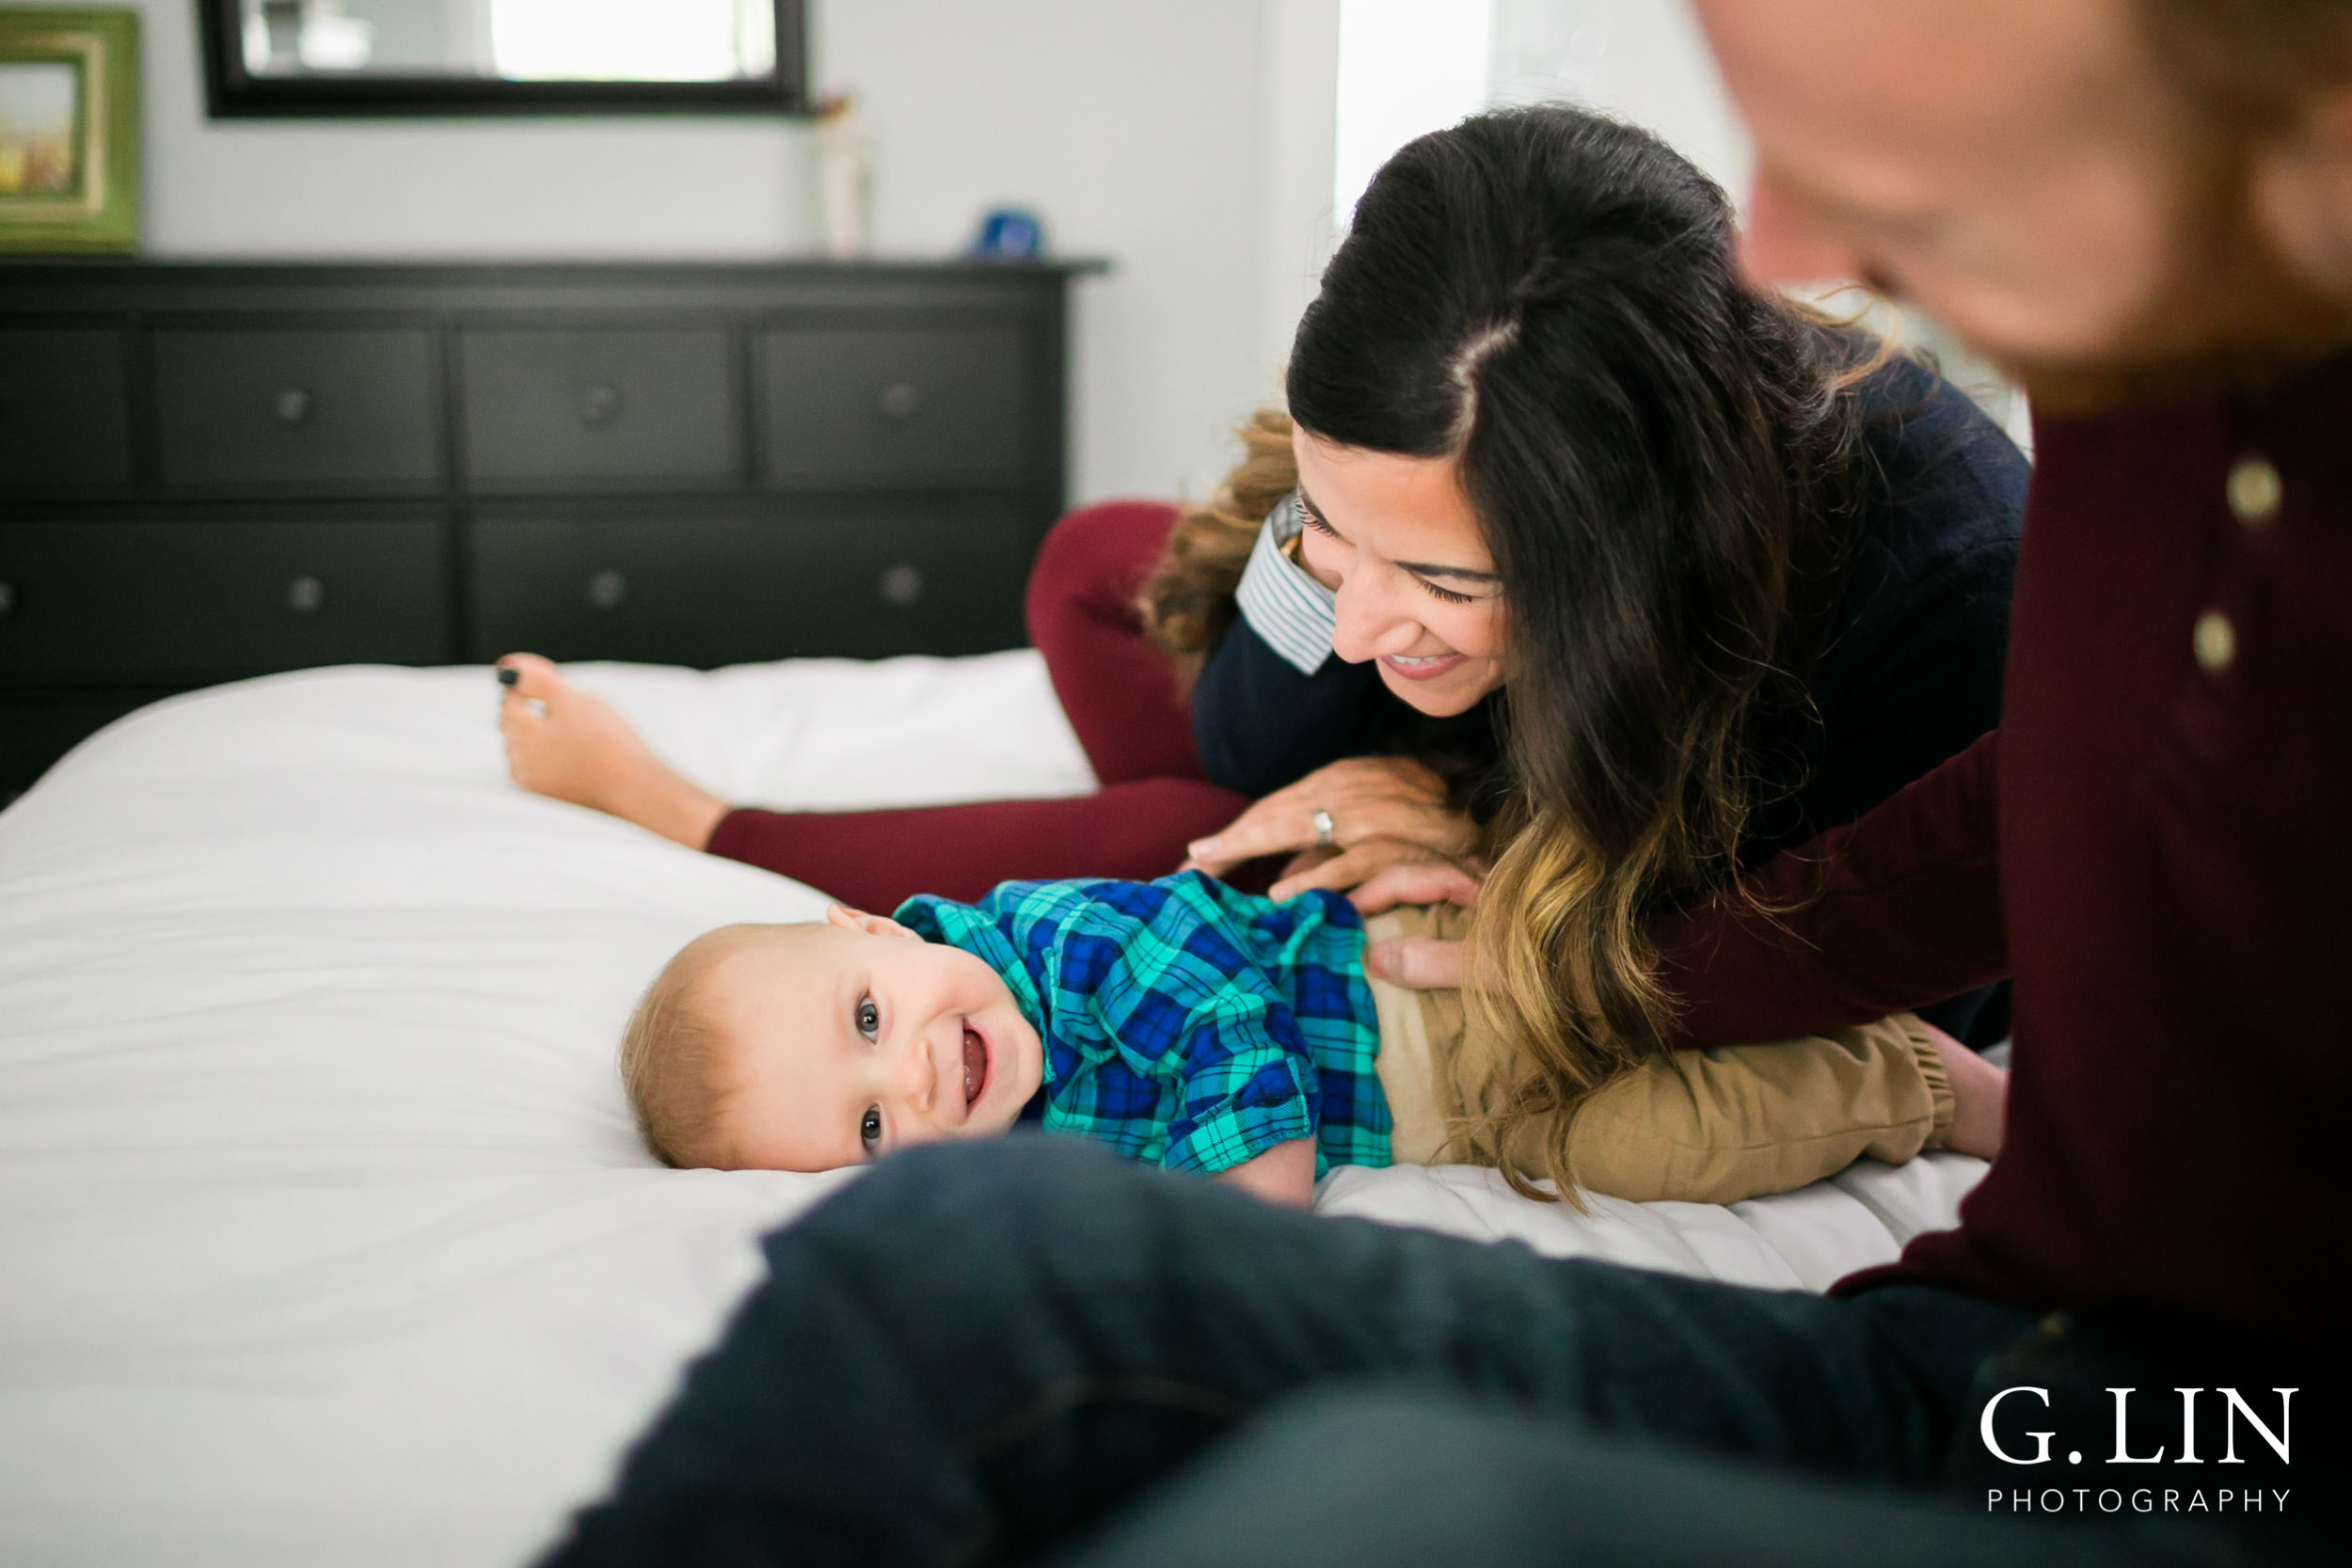 Durham Family Photographer | G. Lin Photography | Smiling baby laughing with parents on bed